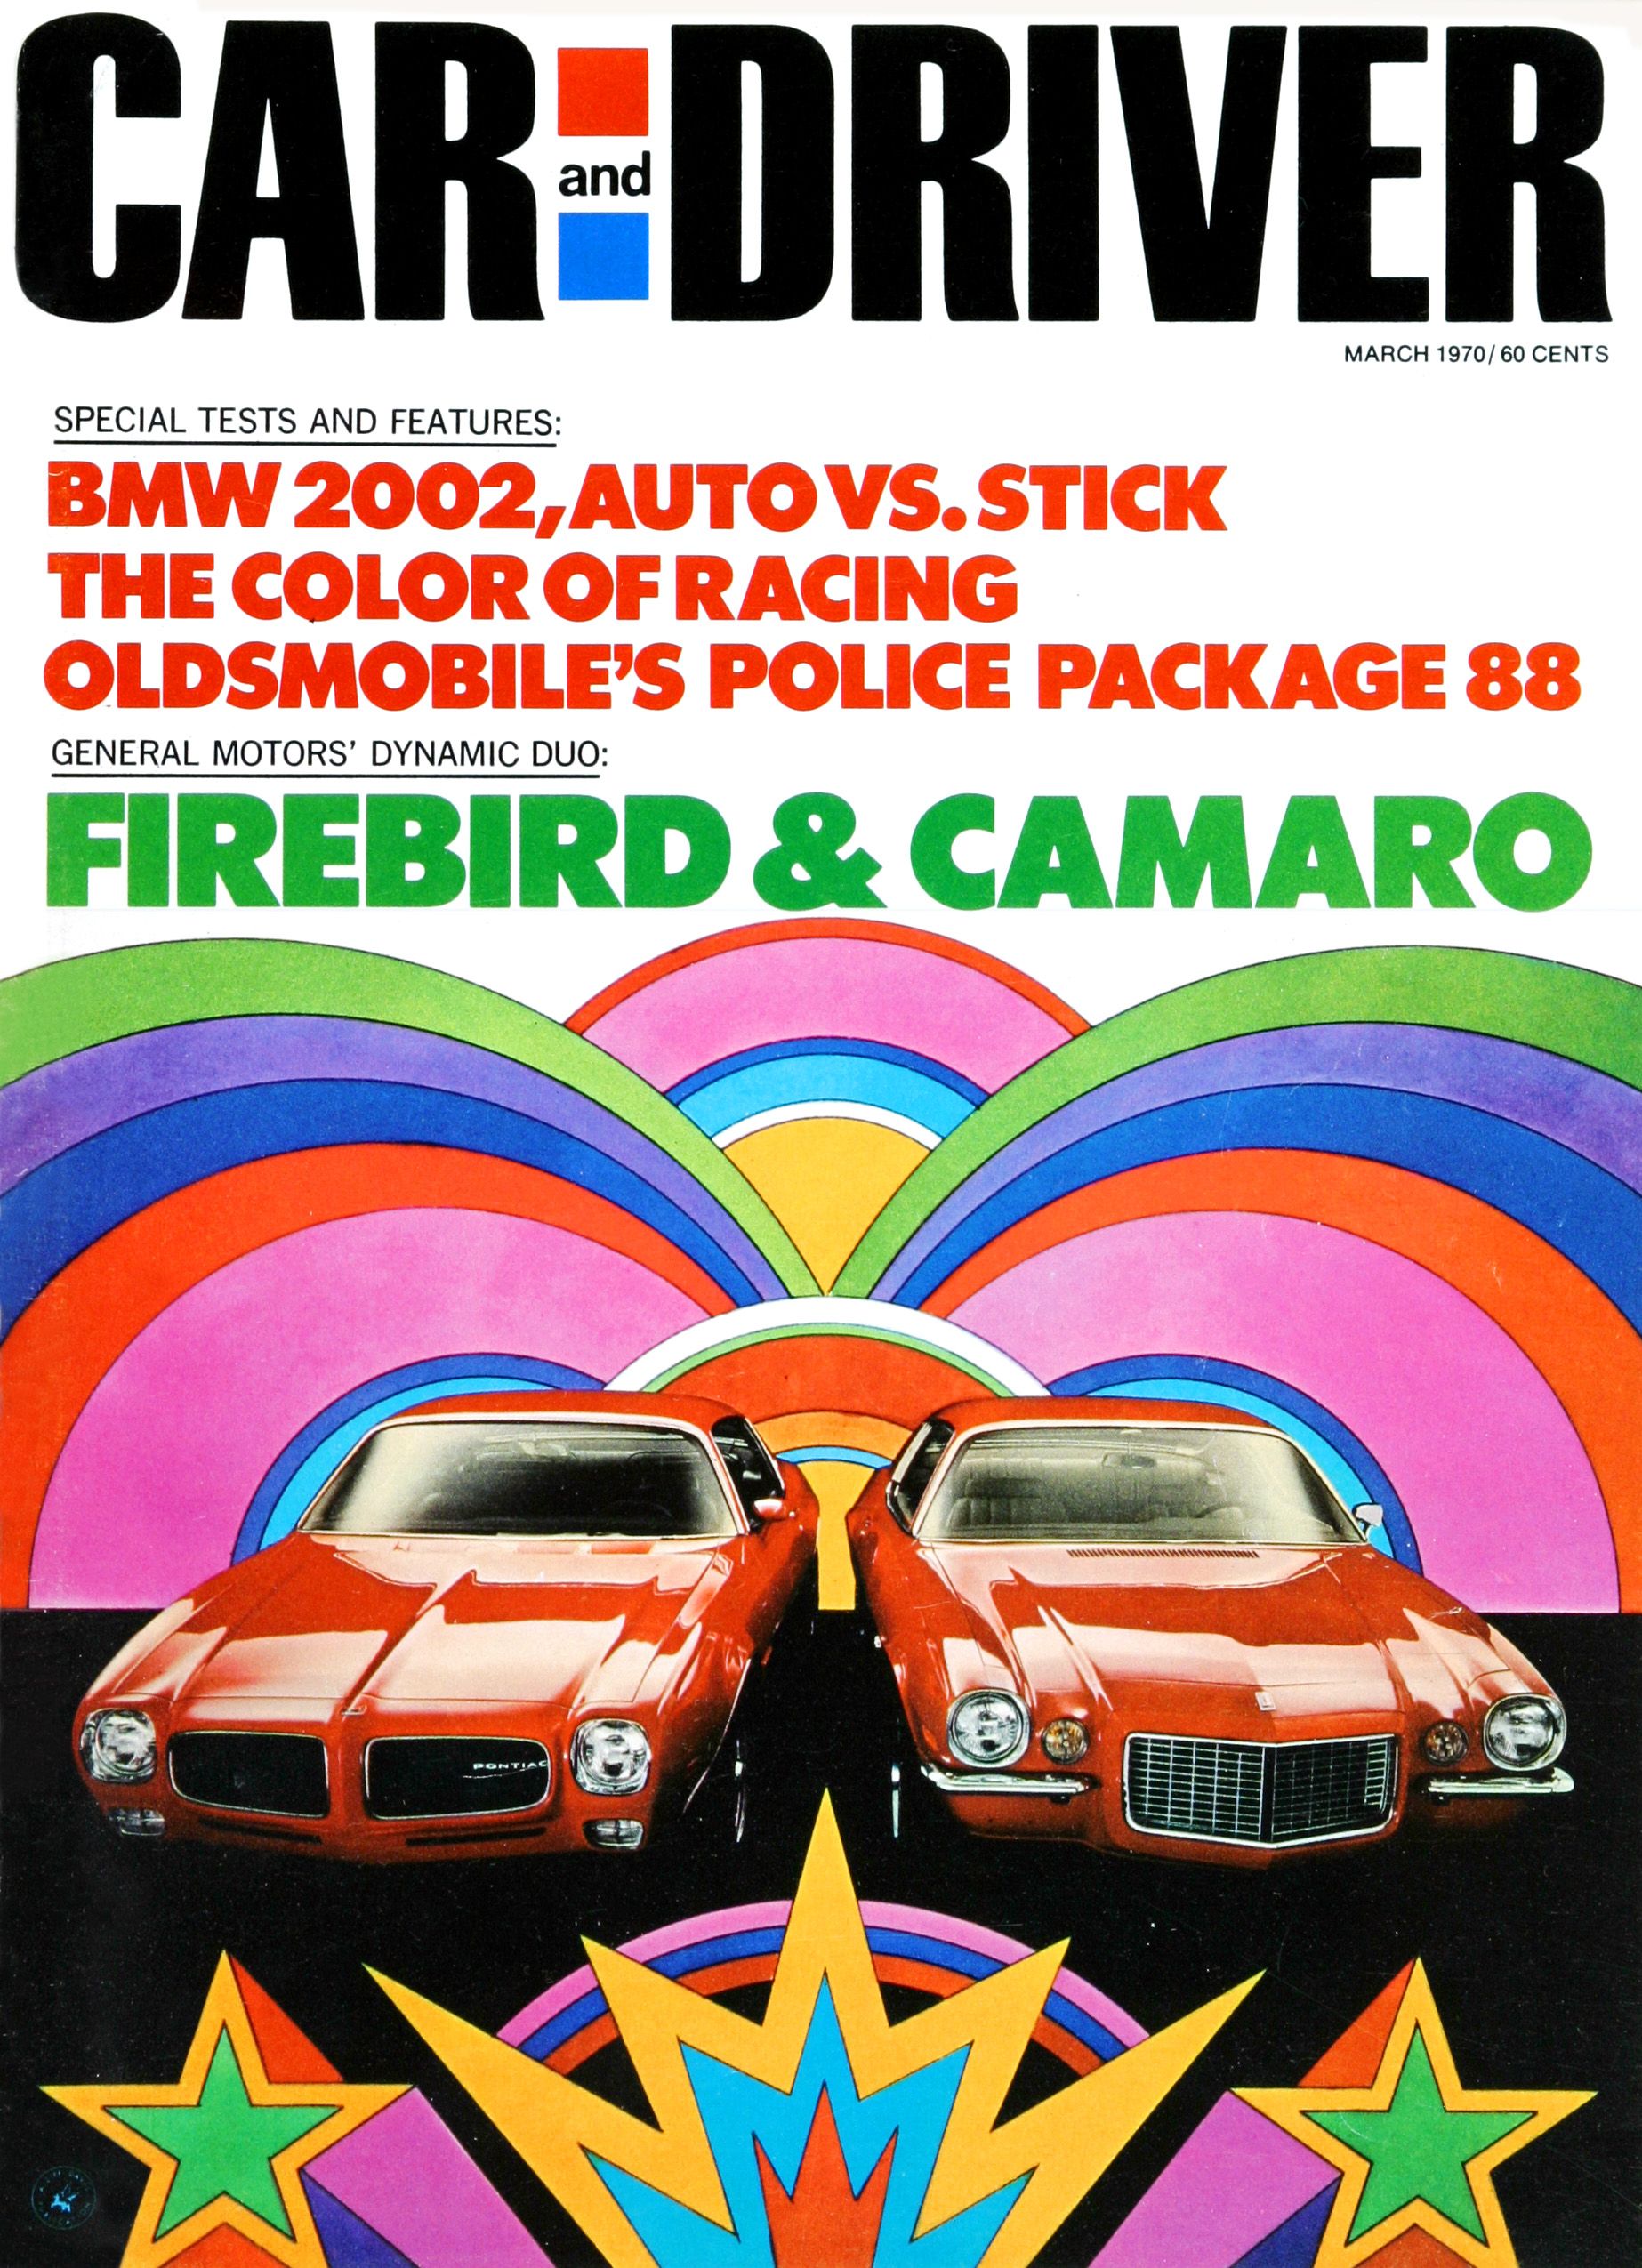 The Us Decade: The Car and Driver Covers of the 1970s